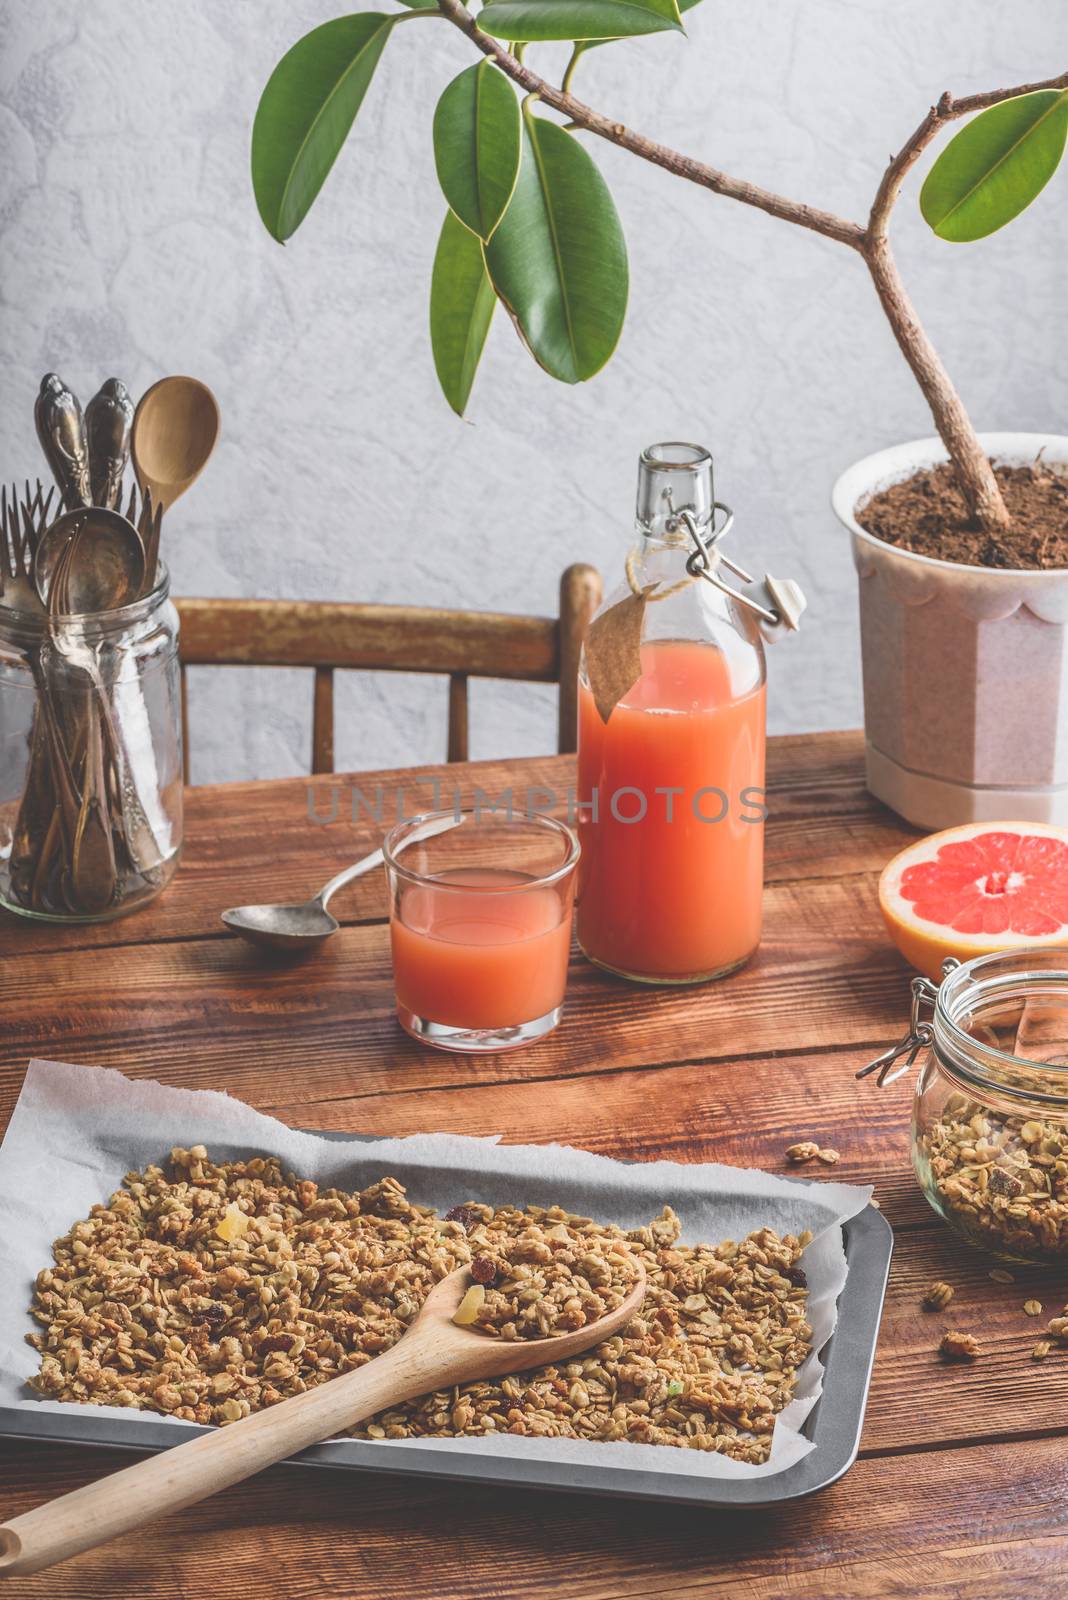 Homemade granola on baking sheet with wooden spoon,  grapefruit juice and sliced fruit